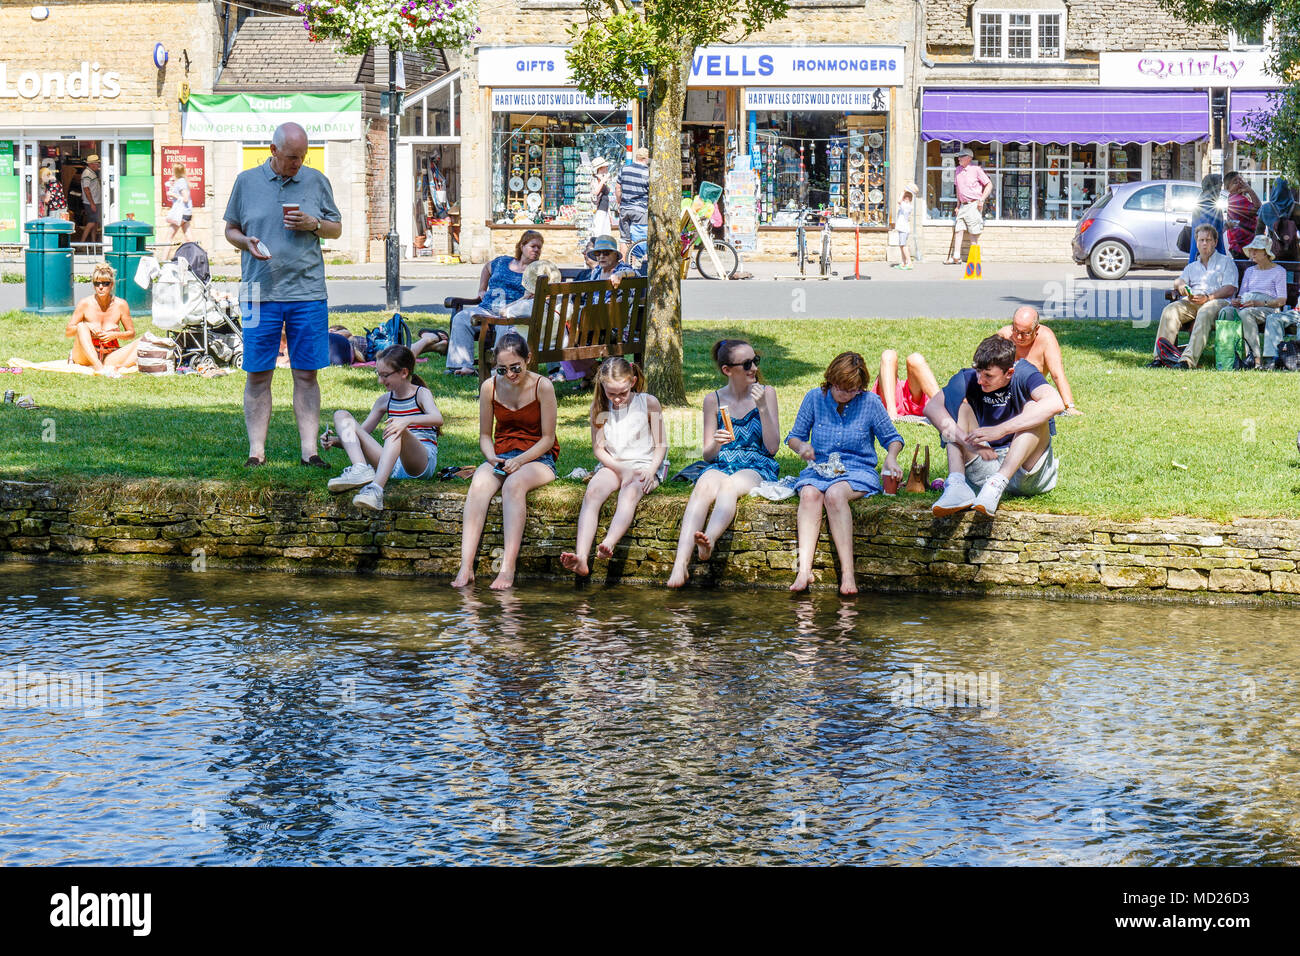 The village of Bourton-on-the-Water is hotspot for tourists in the Cotswolds Stock Photo